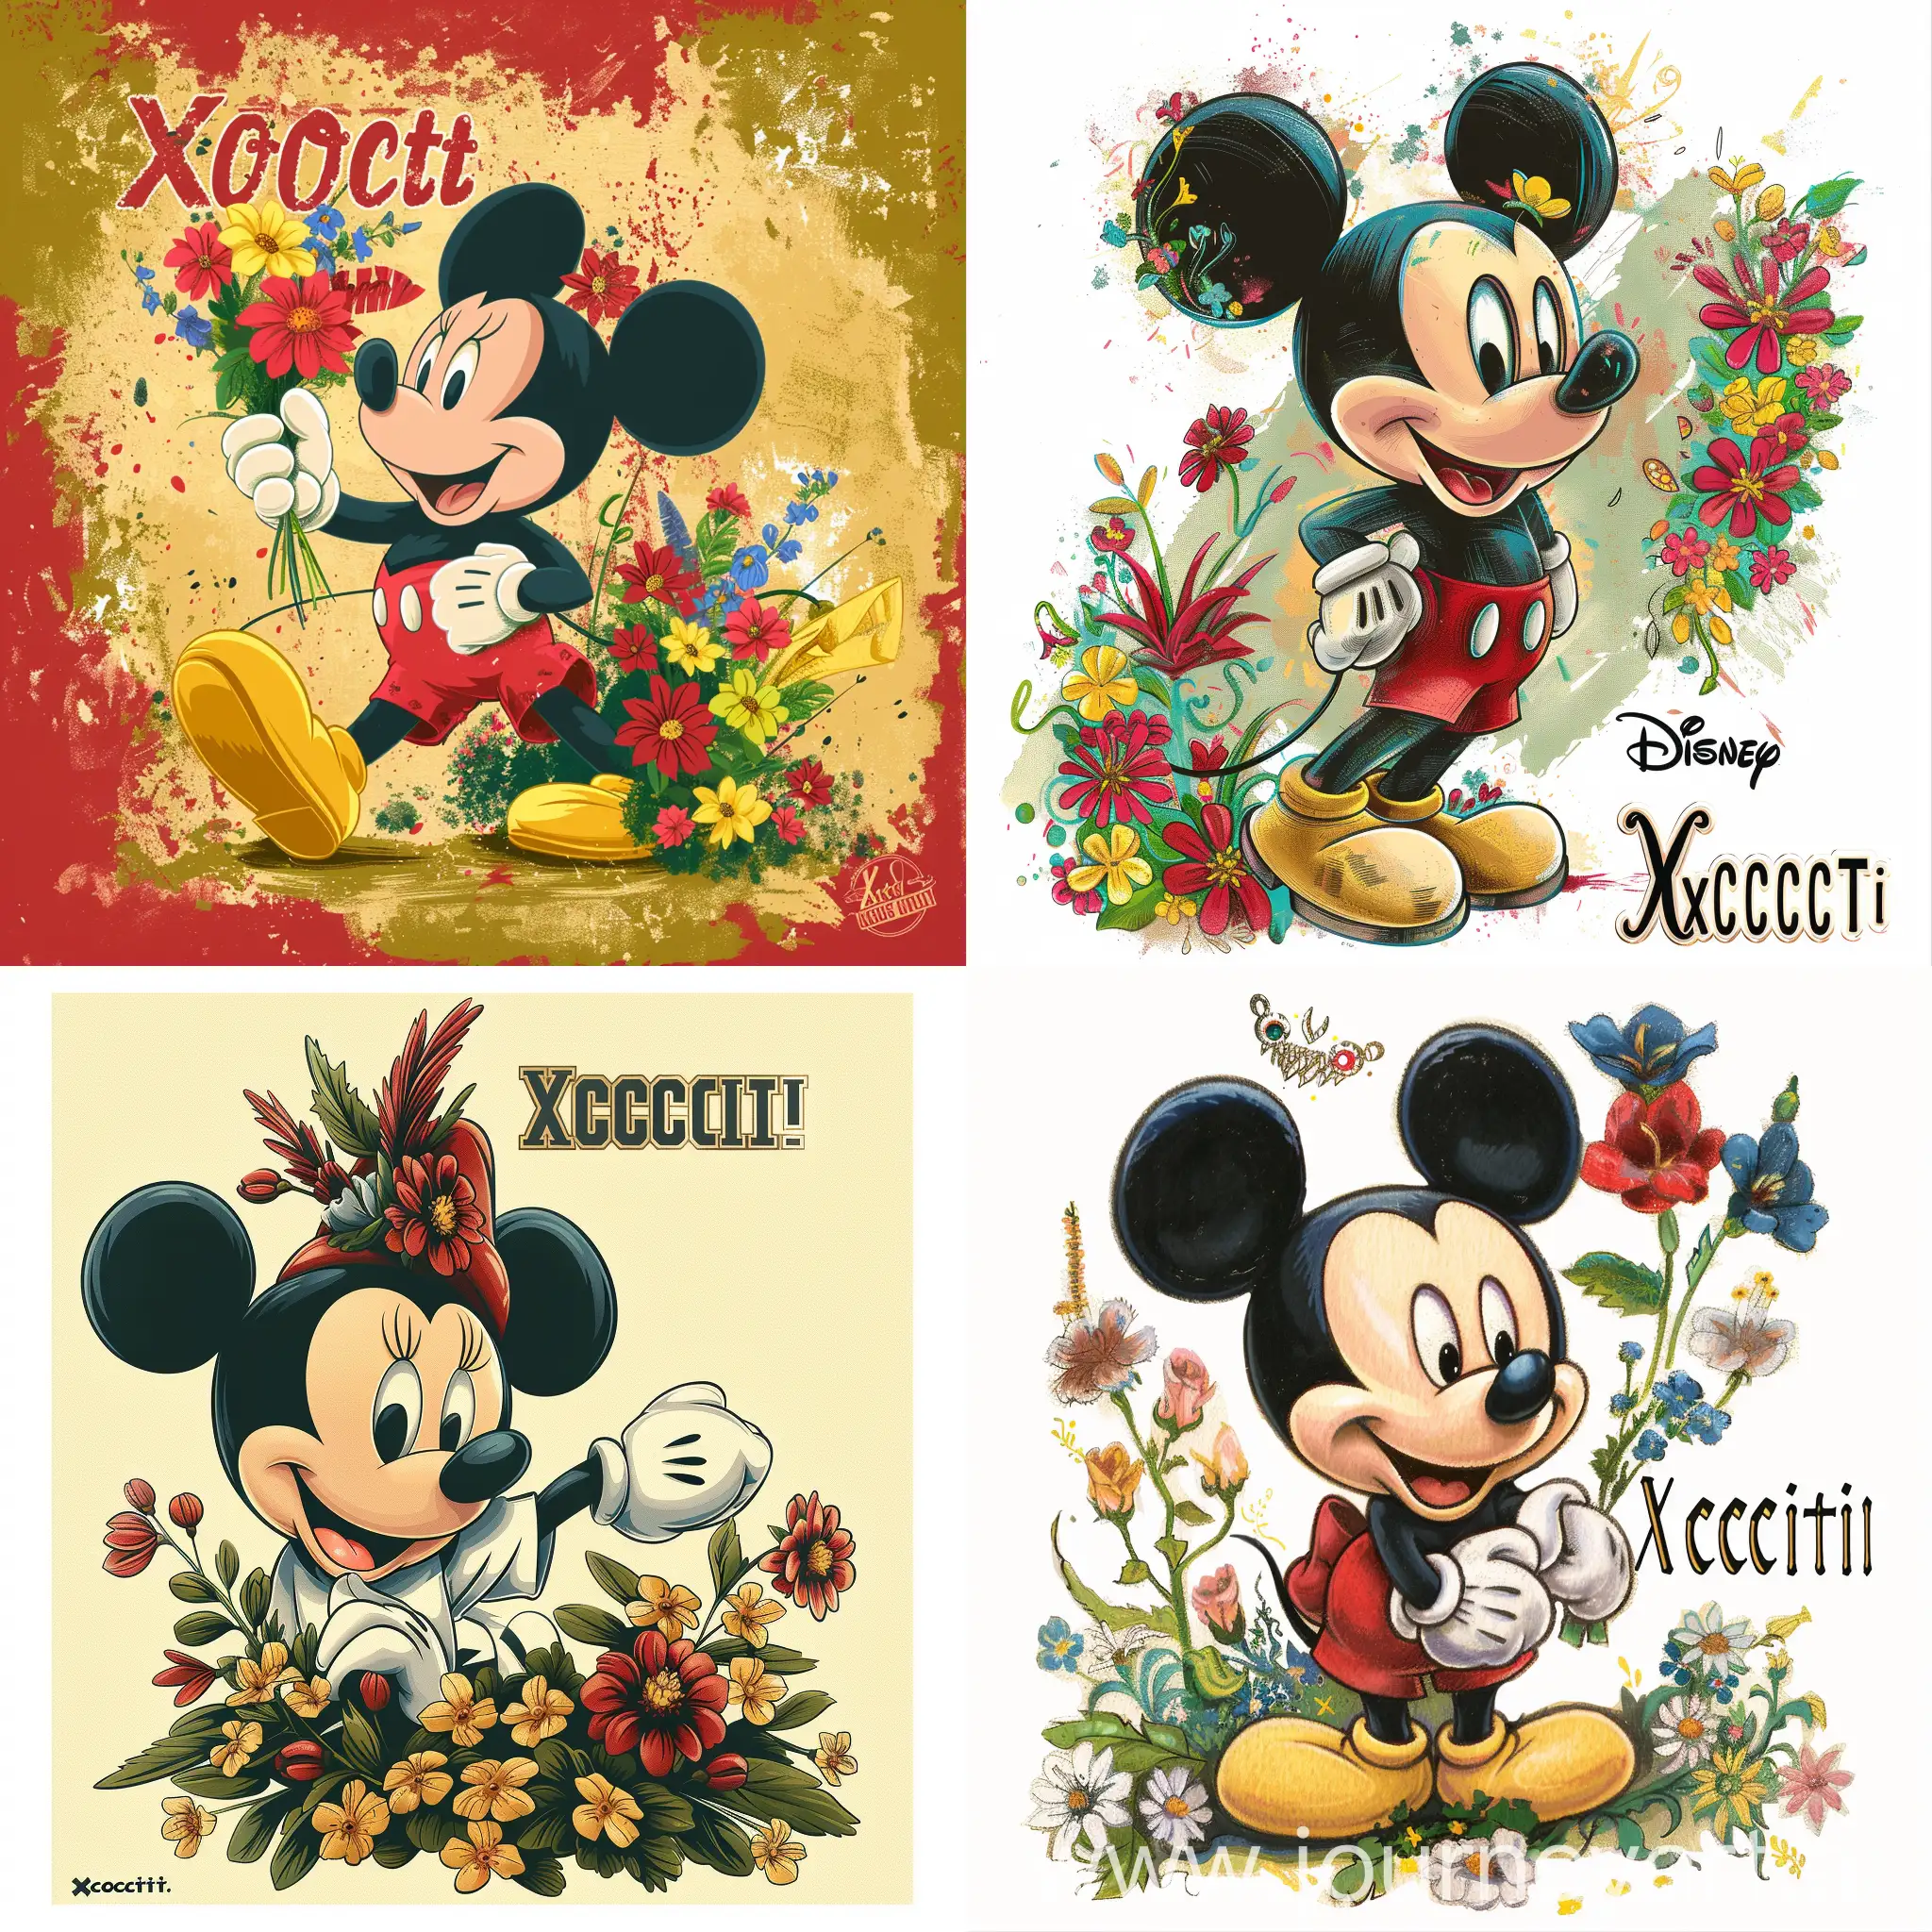 Mickey-Mouse-Surrounded-by-Vibrant-Flowers-in-Xochitl-Tribute